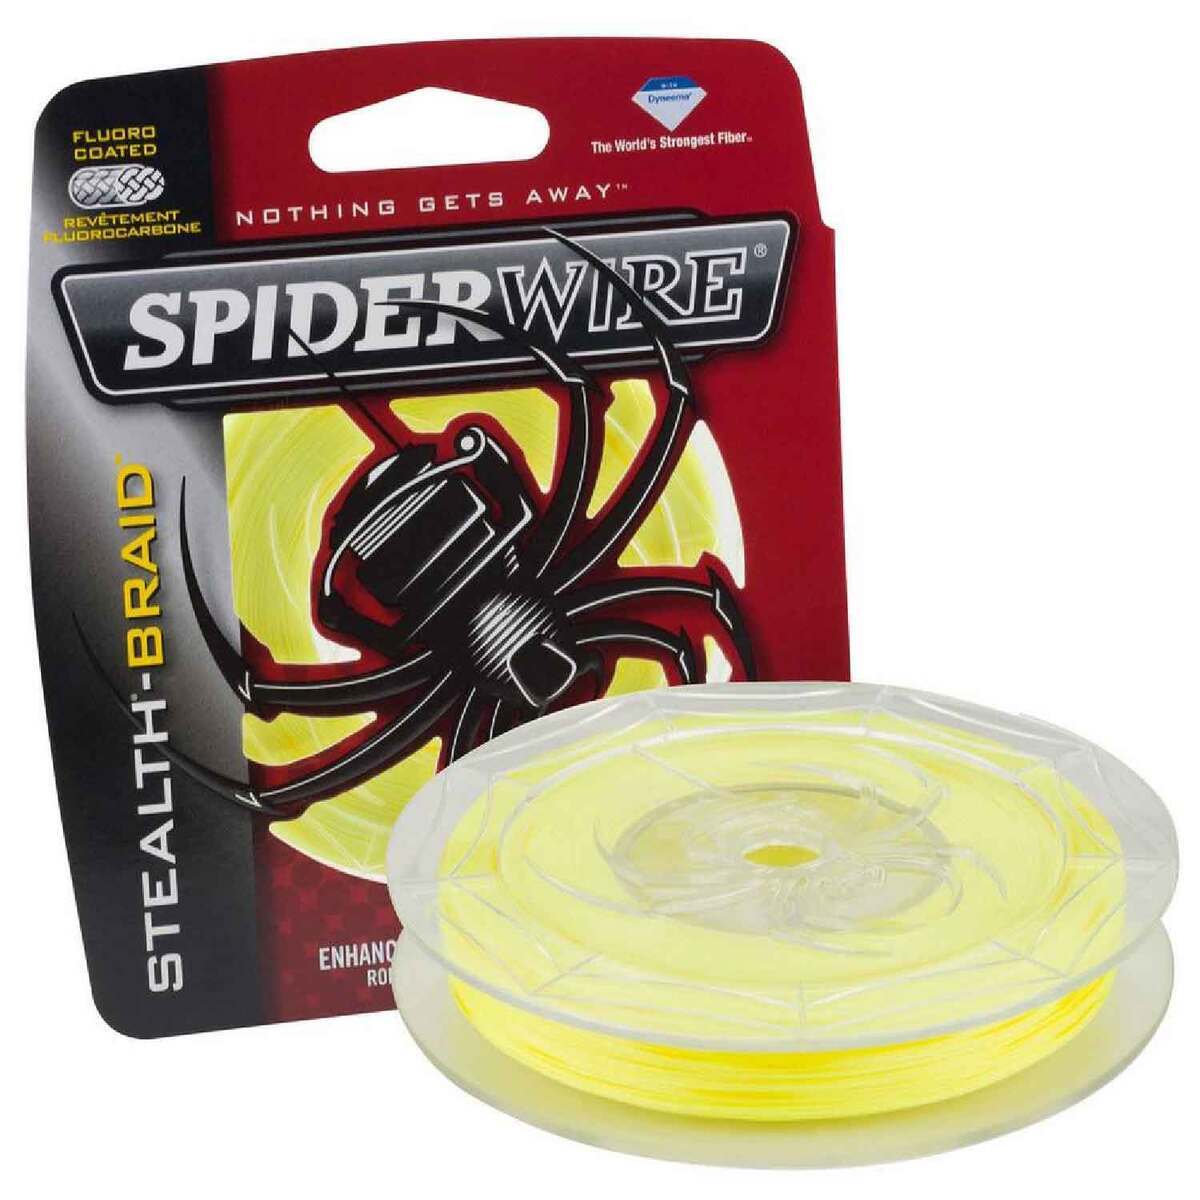 Spiderwire Stealth Braided Fishing Line - 20lb. Moss Green, 125yds